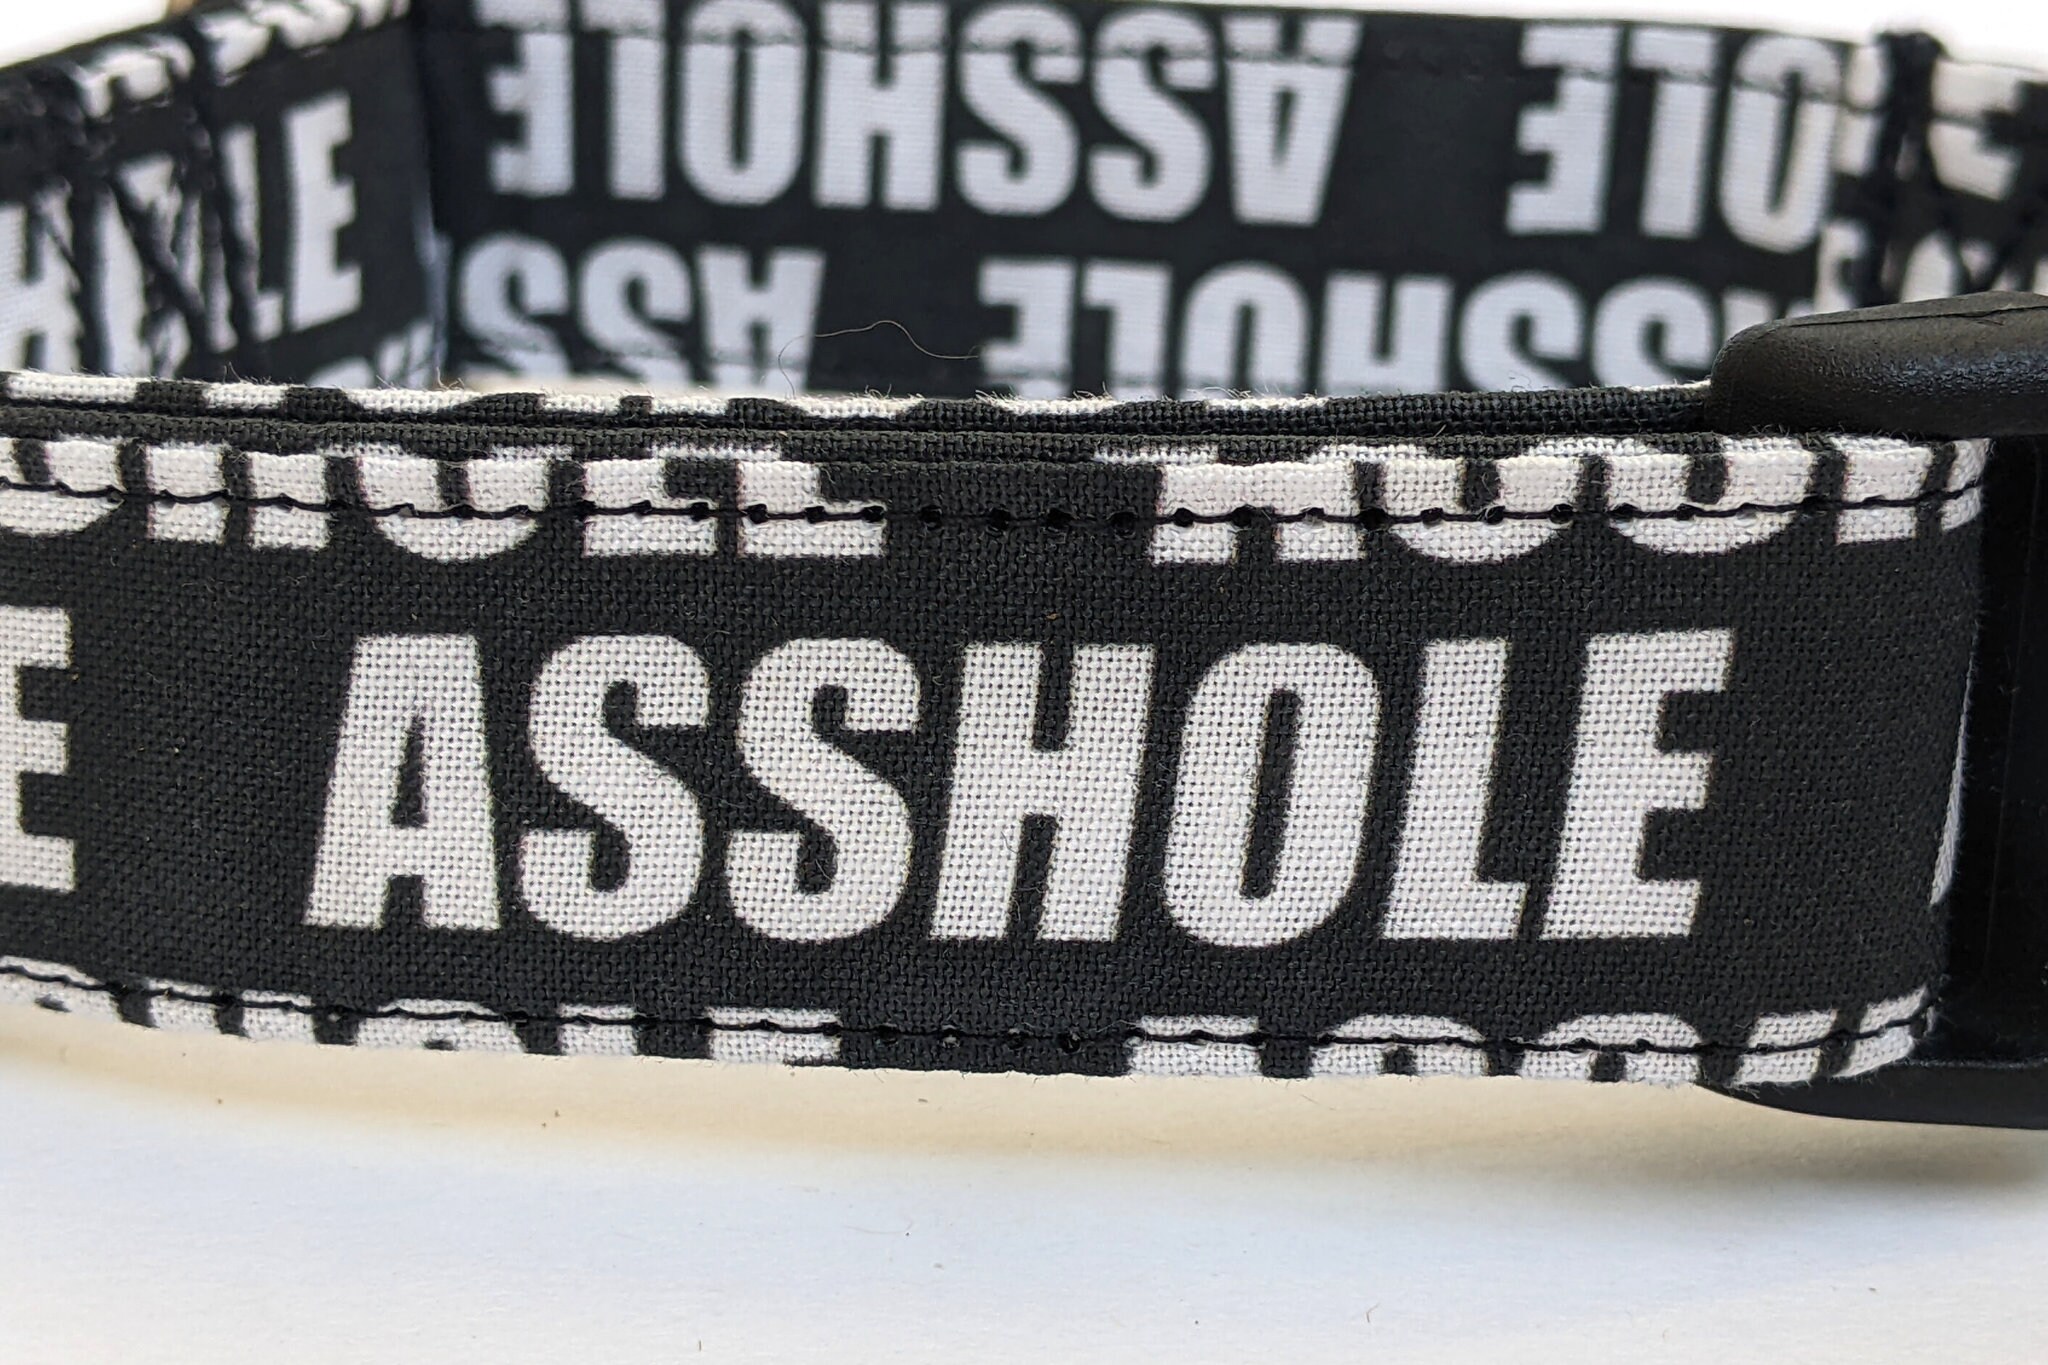 Asshole Dog Collar Funny Dog Collar Bad Words Adult Content 